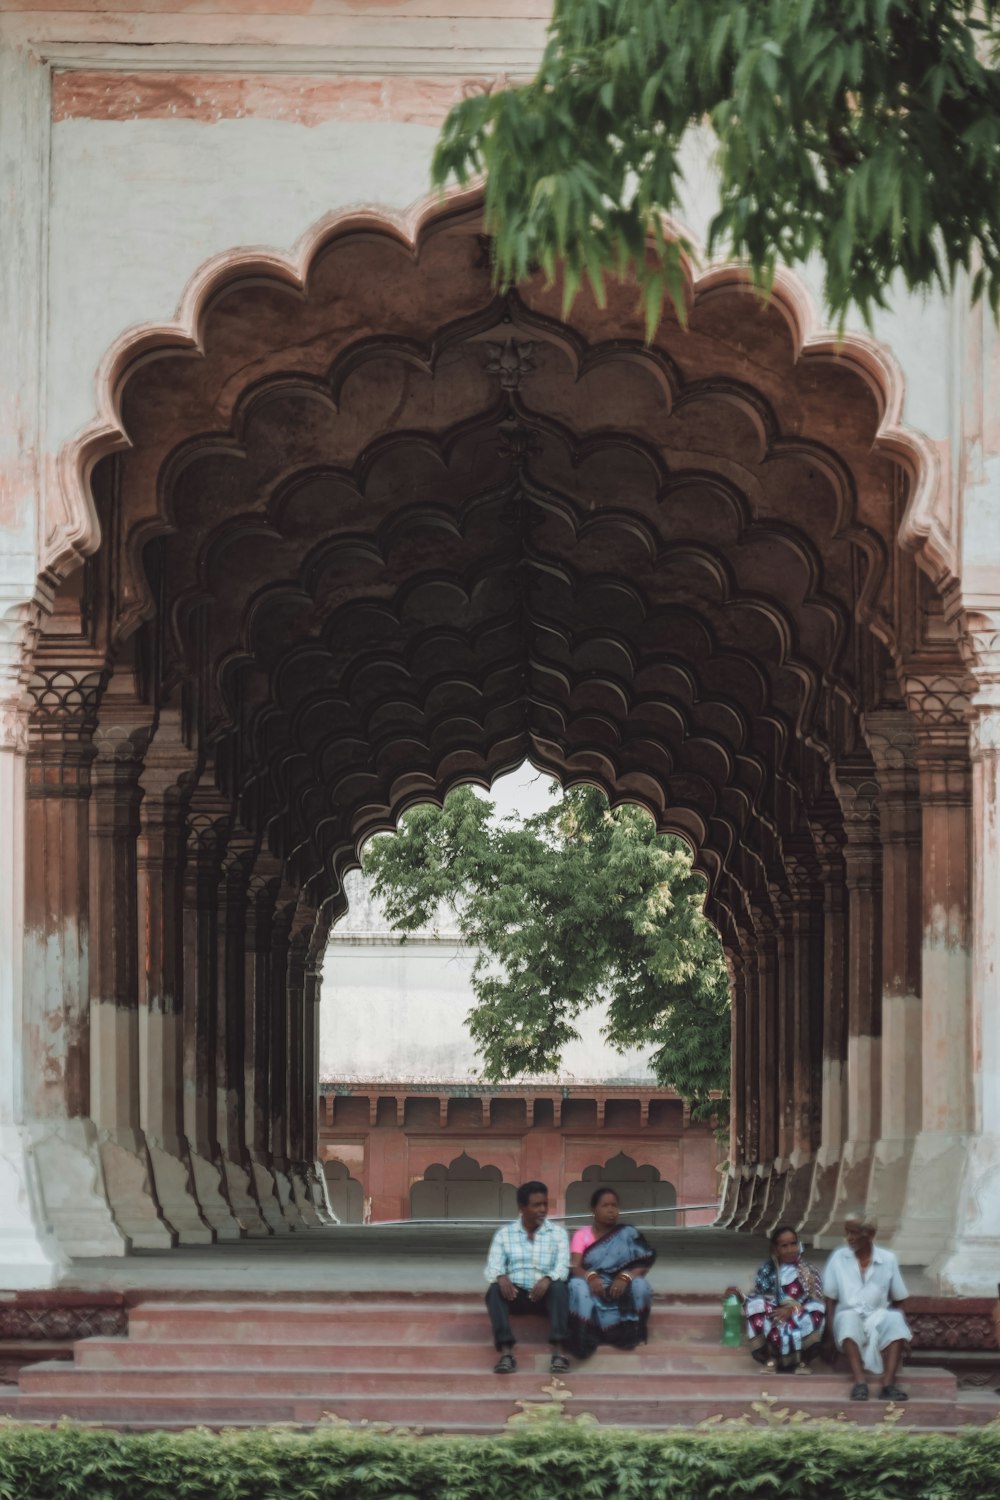 a group of people sitting under an archway